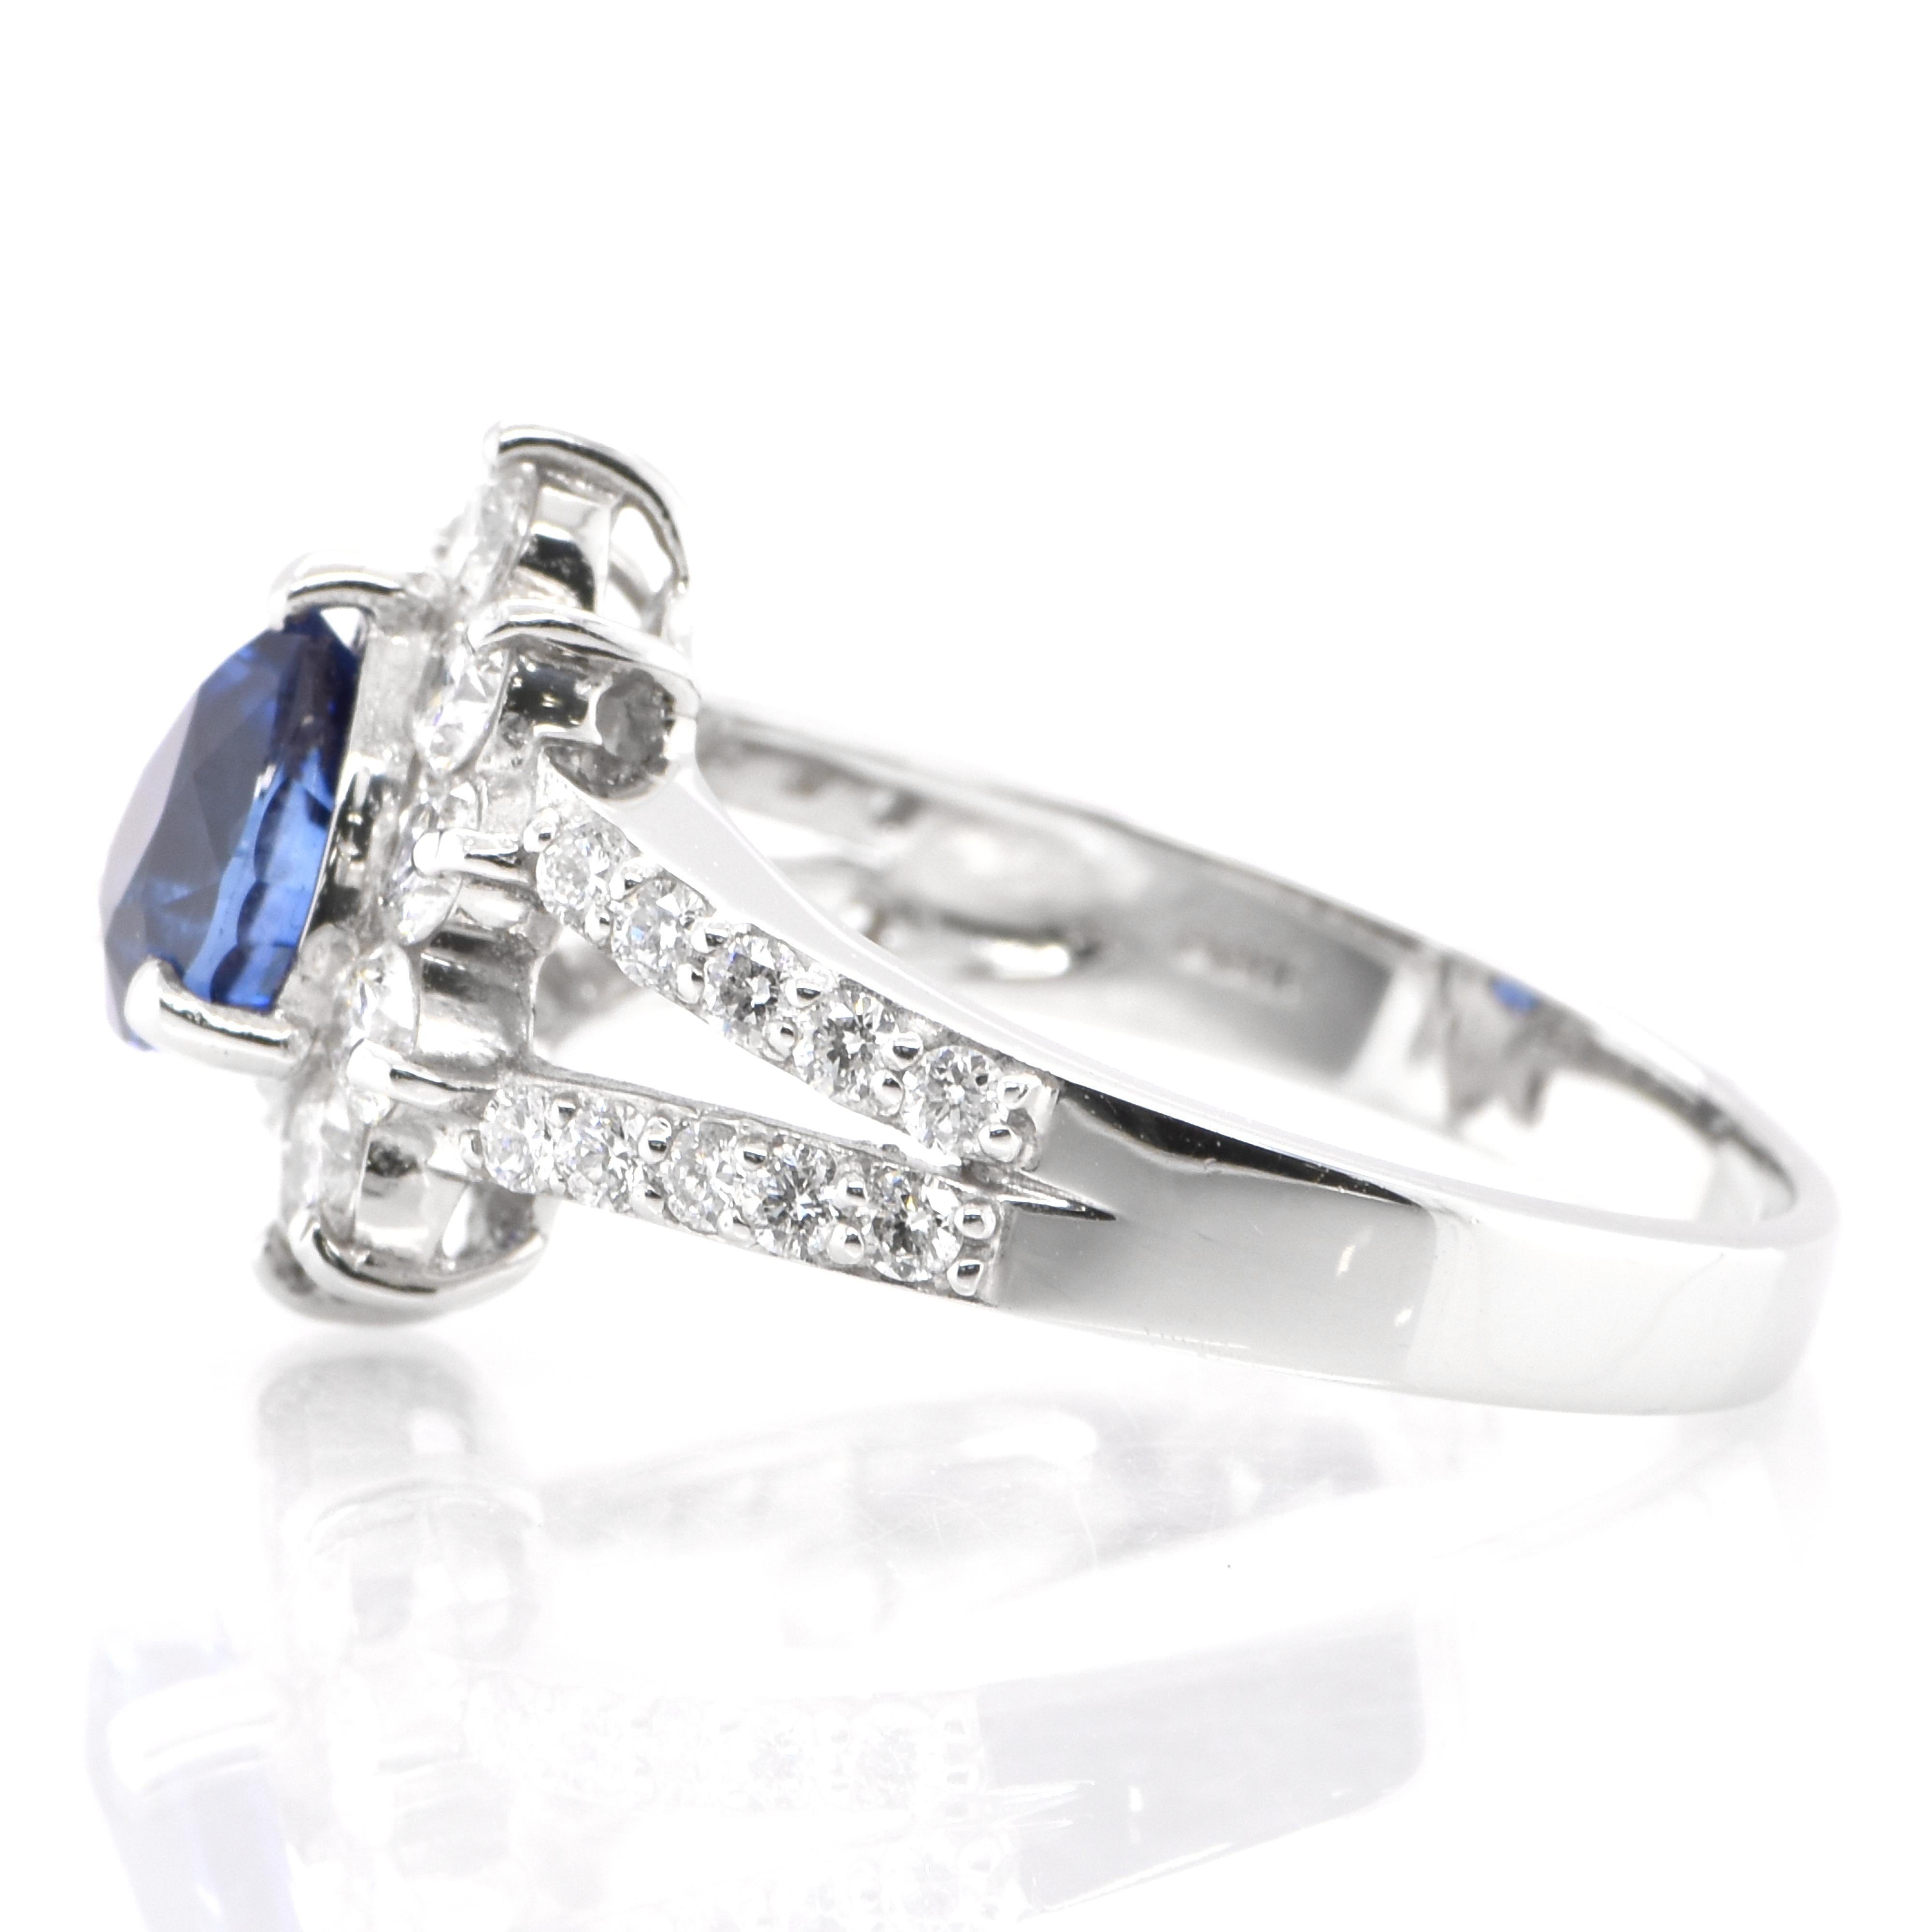 Pear Cut 1.24 Carat Natural Blue Sapphire and Diamond Ring Set in Platinum For Sale